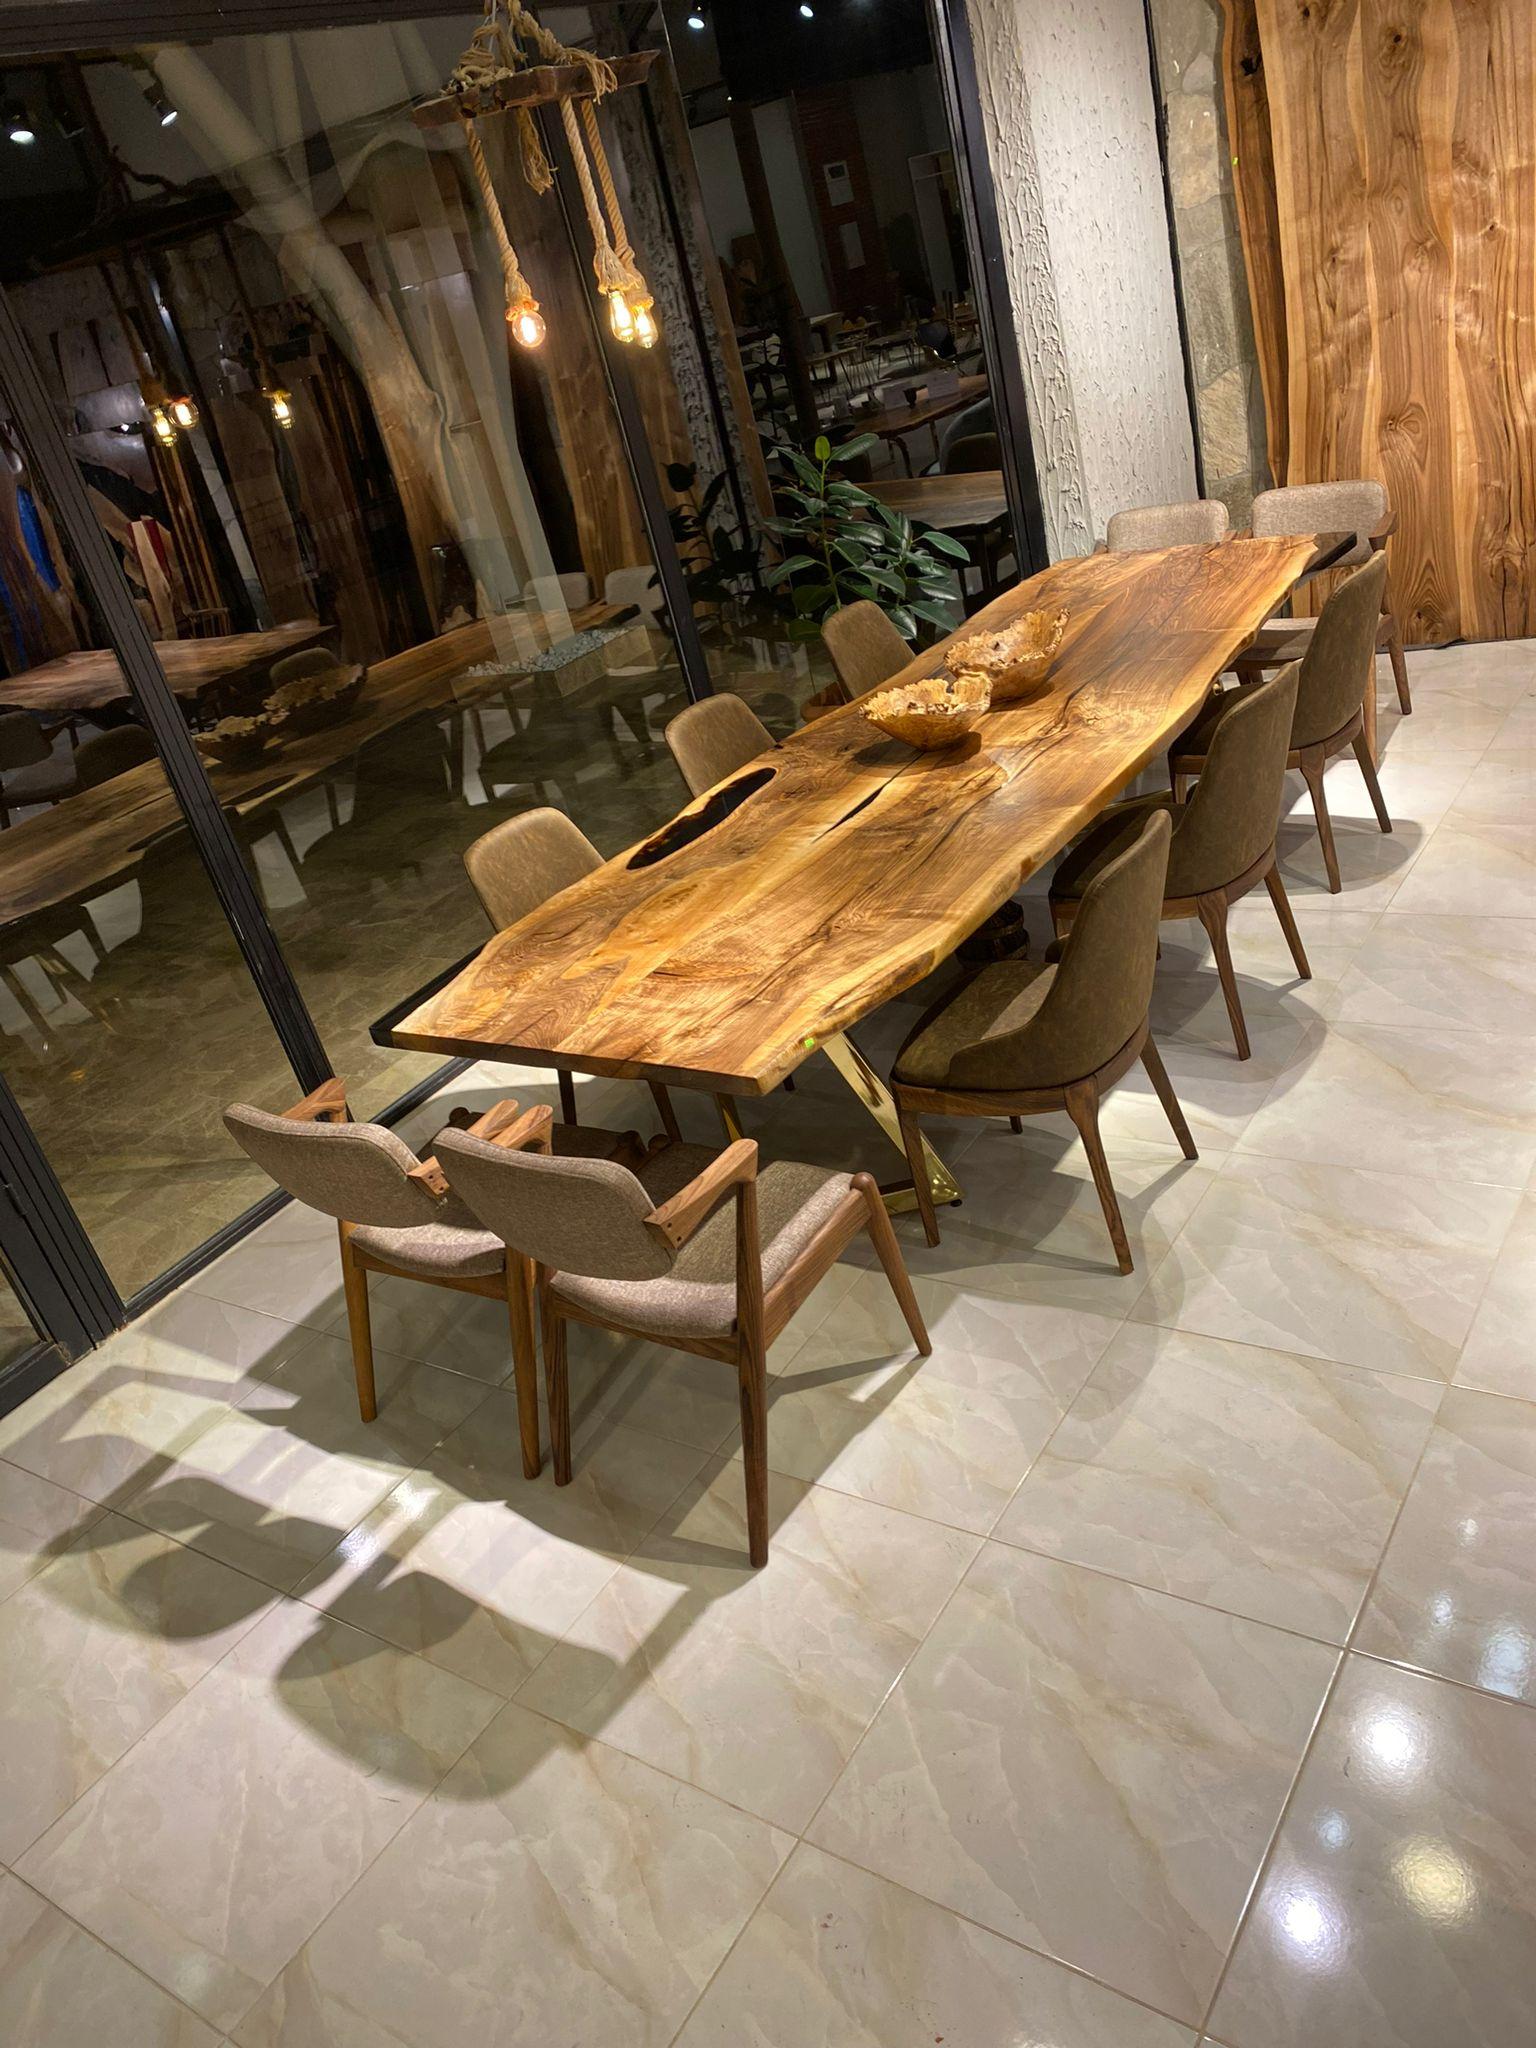 Walnut Live Edge Clear Epoxy Resin Kitchen & Dining Table 

This table is made of 500 years old Walnut Wood. The grains and texture of the wood describe what a natural walnut woods looks like.
It can be used as a dining table or as a conference